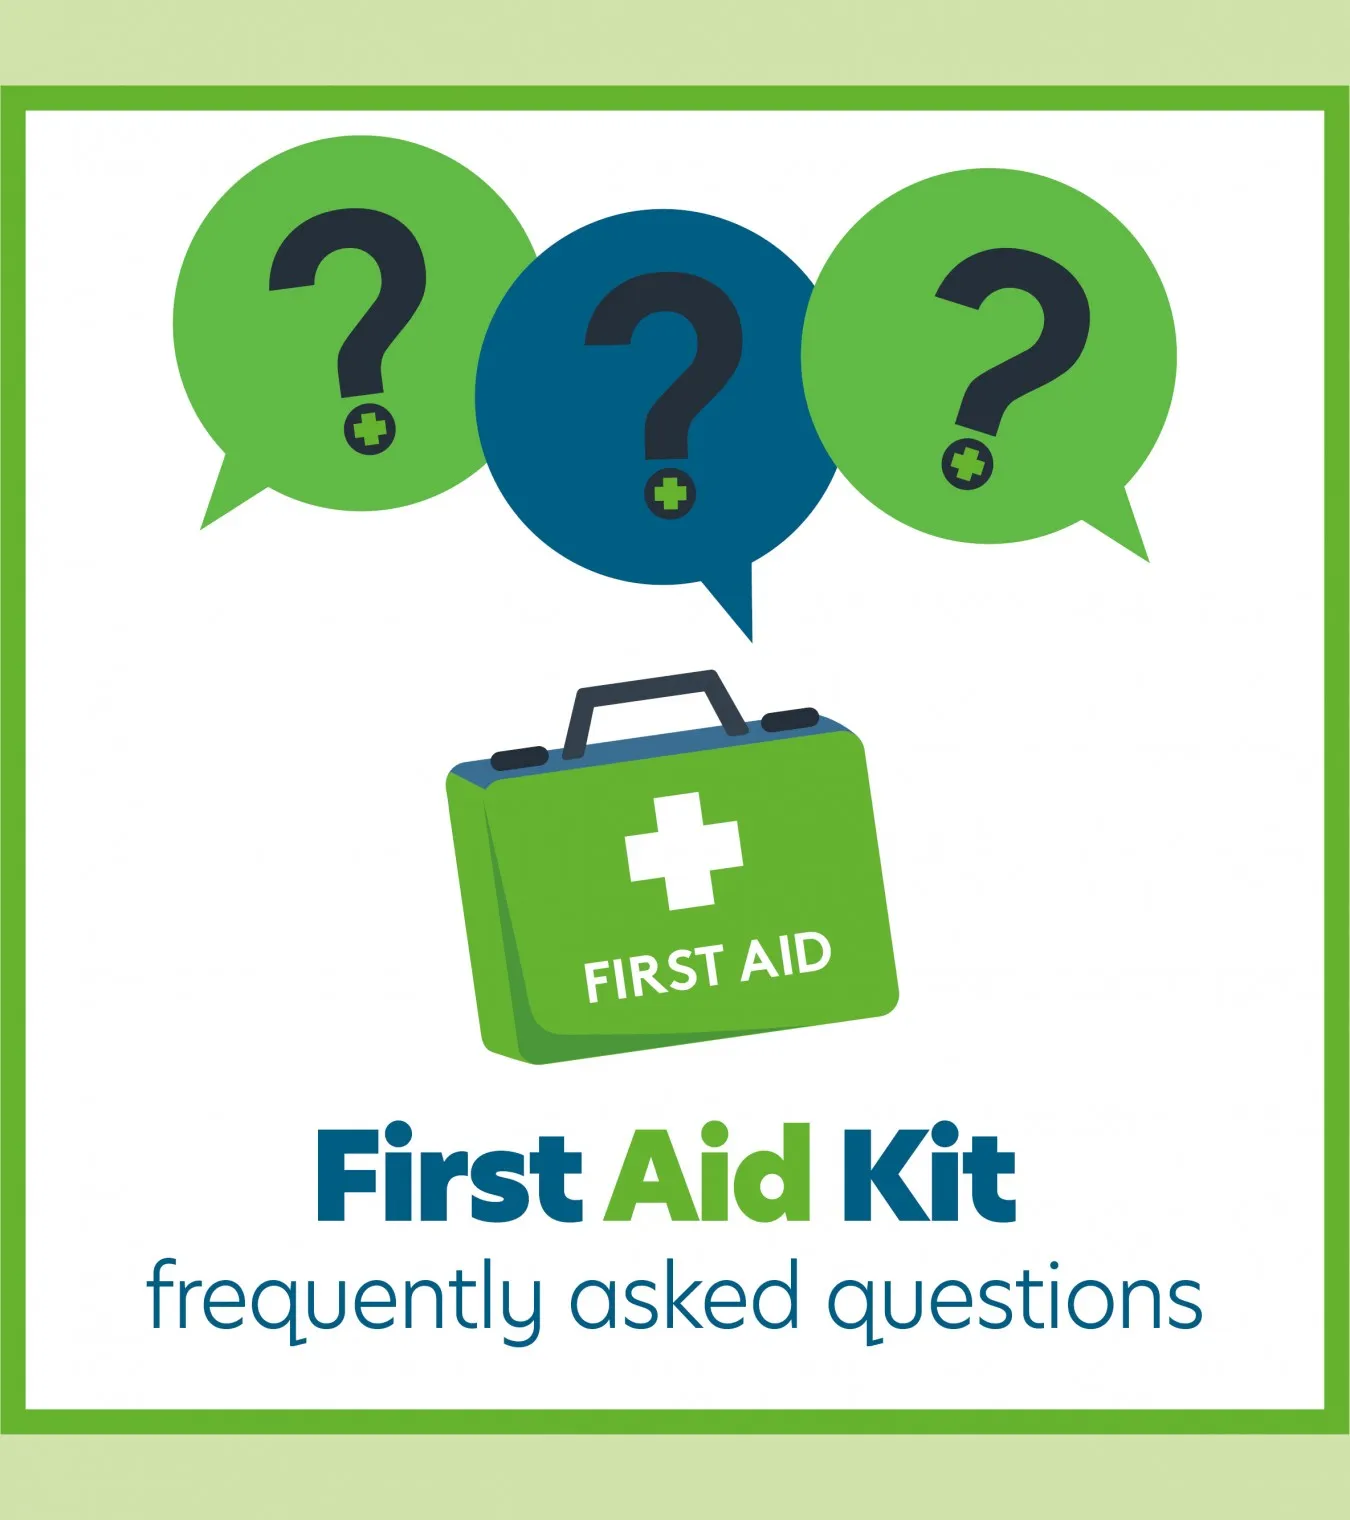 What should I have in my First Aid Kit? | Your Questions Answered